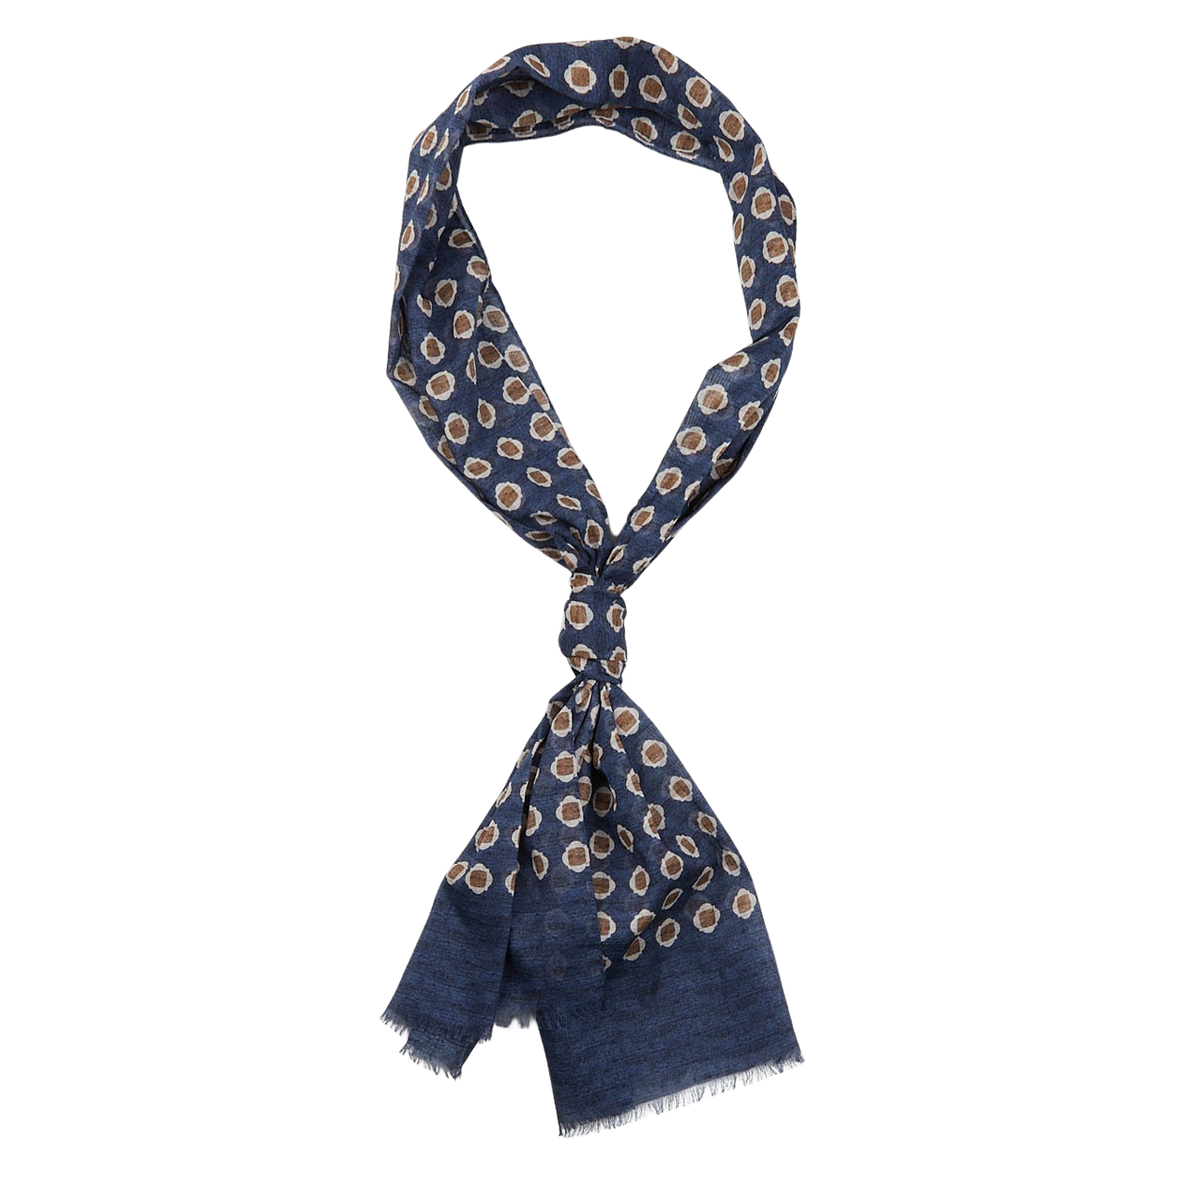 Dark Blue Geometrical Printed Cotton Scarf by Amanda Christensen with an abstract dot pattern, made in Italy, casually tied on a white background.